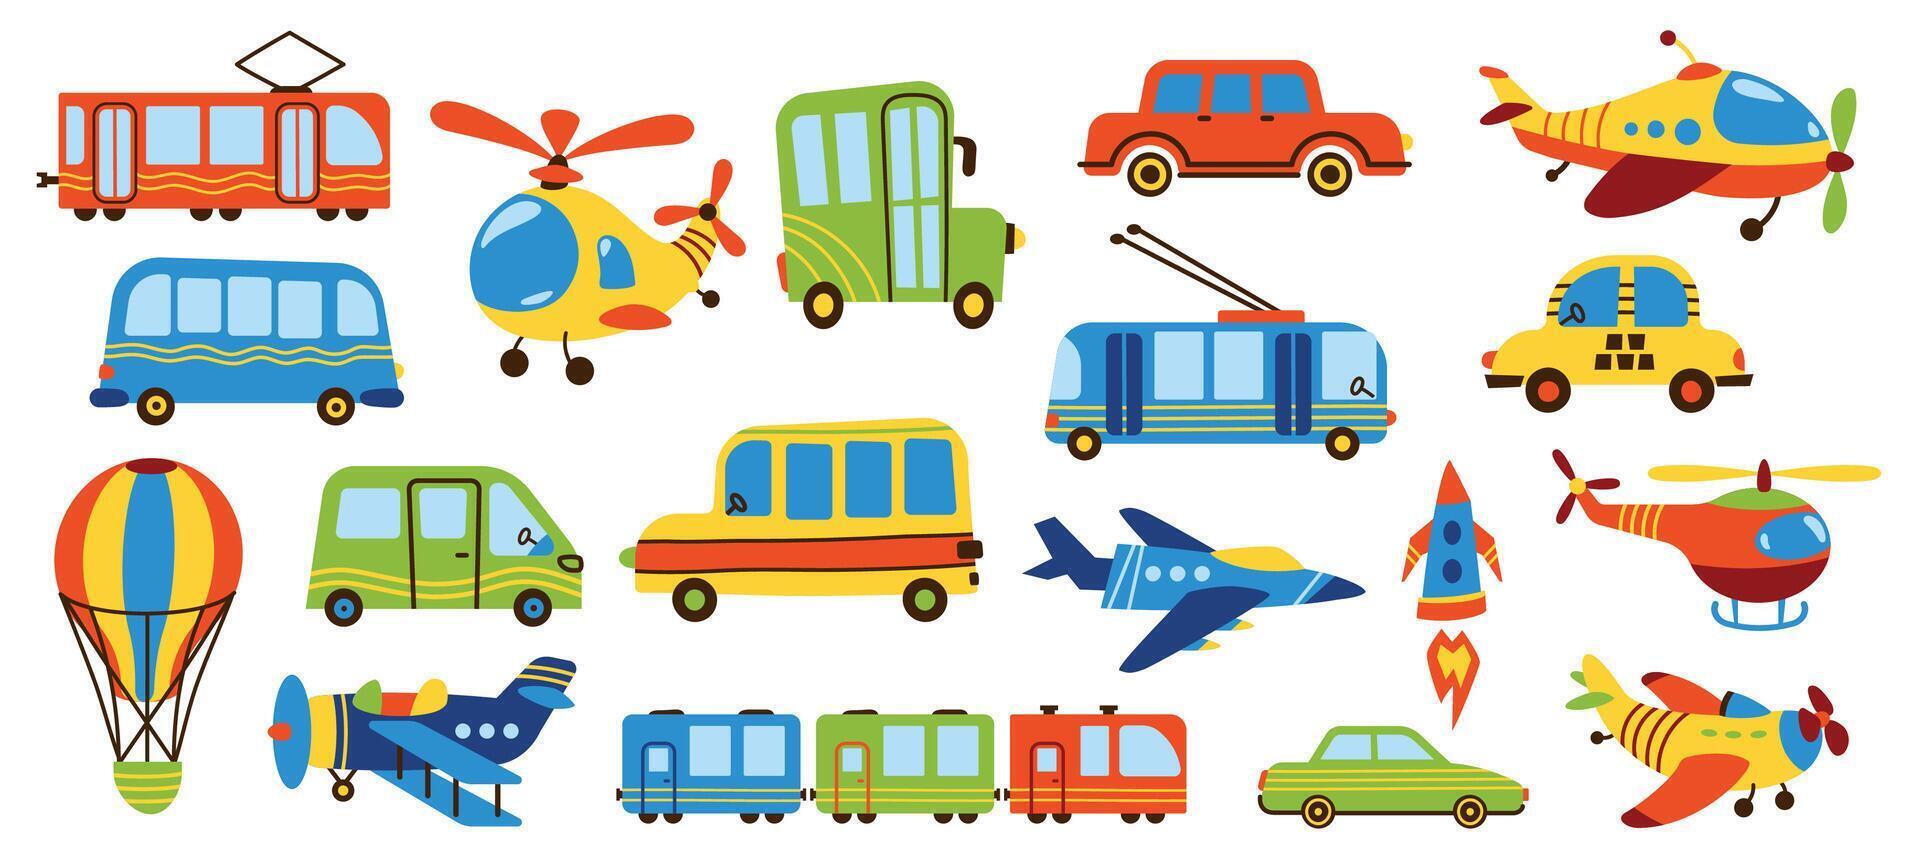 Childish transport. Cute cartoon train taxi car plane blimp hot air balloon, set of funny flat road vehicle toys doodle style. Vector isolated collection